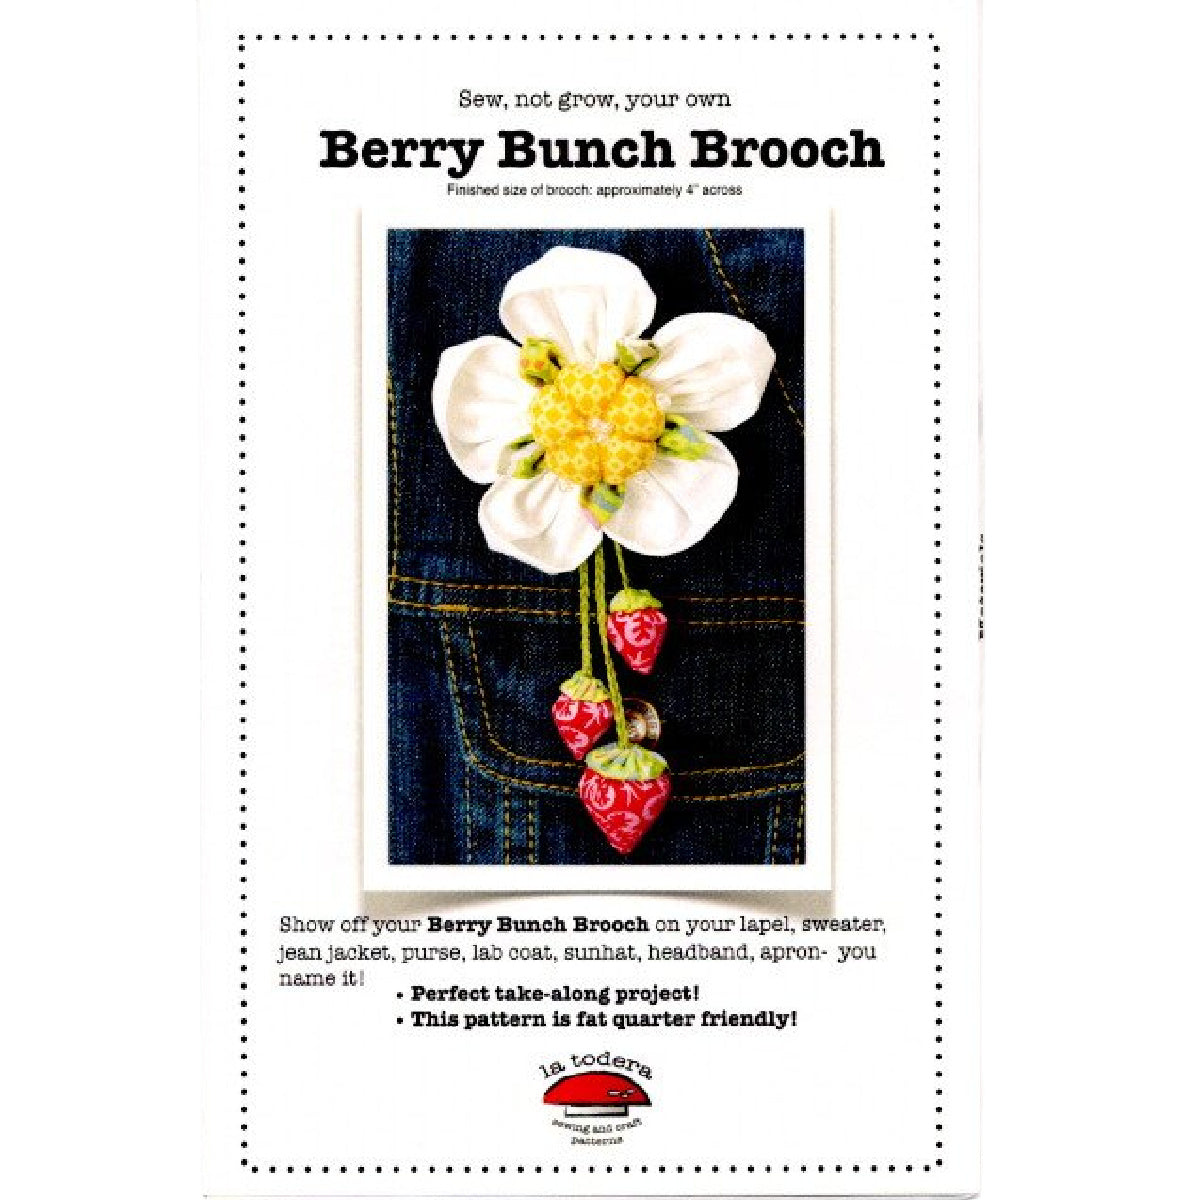 Berry Bunch Brooch Sewing Pattern - Nonna's Notions N' Sew On